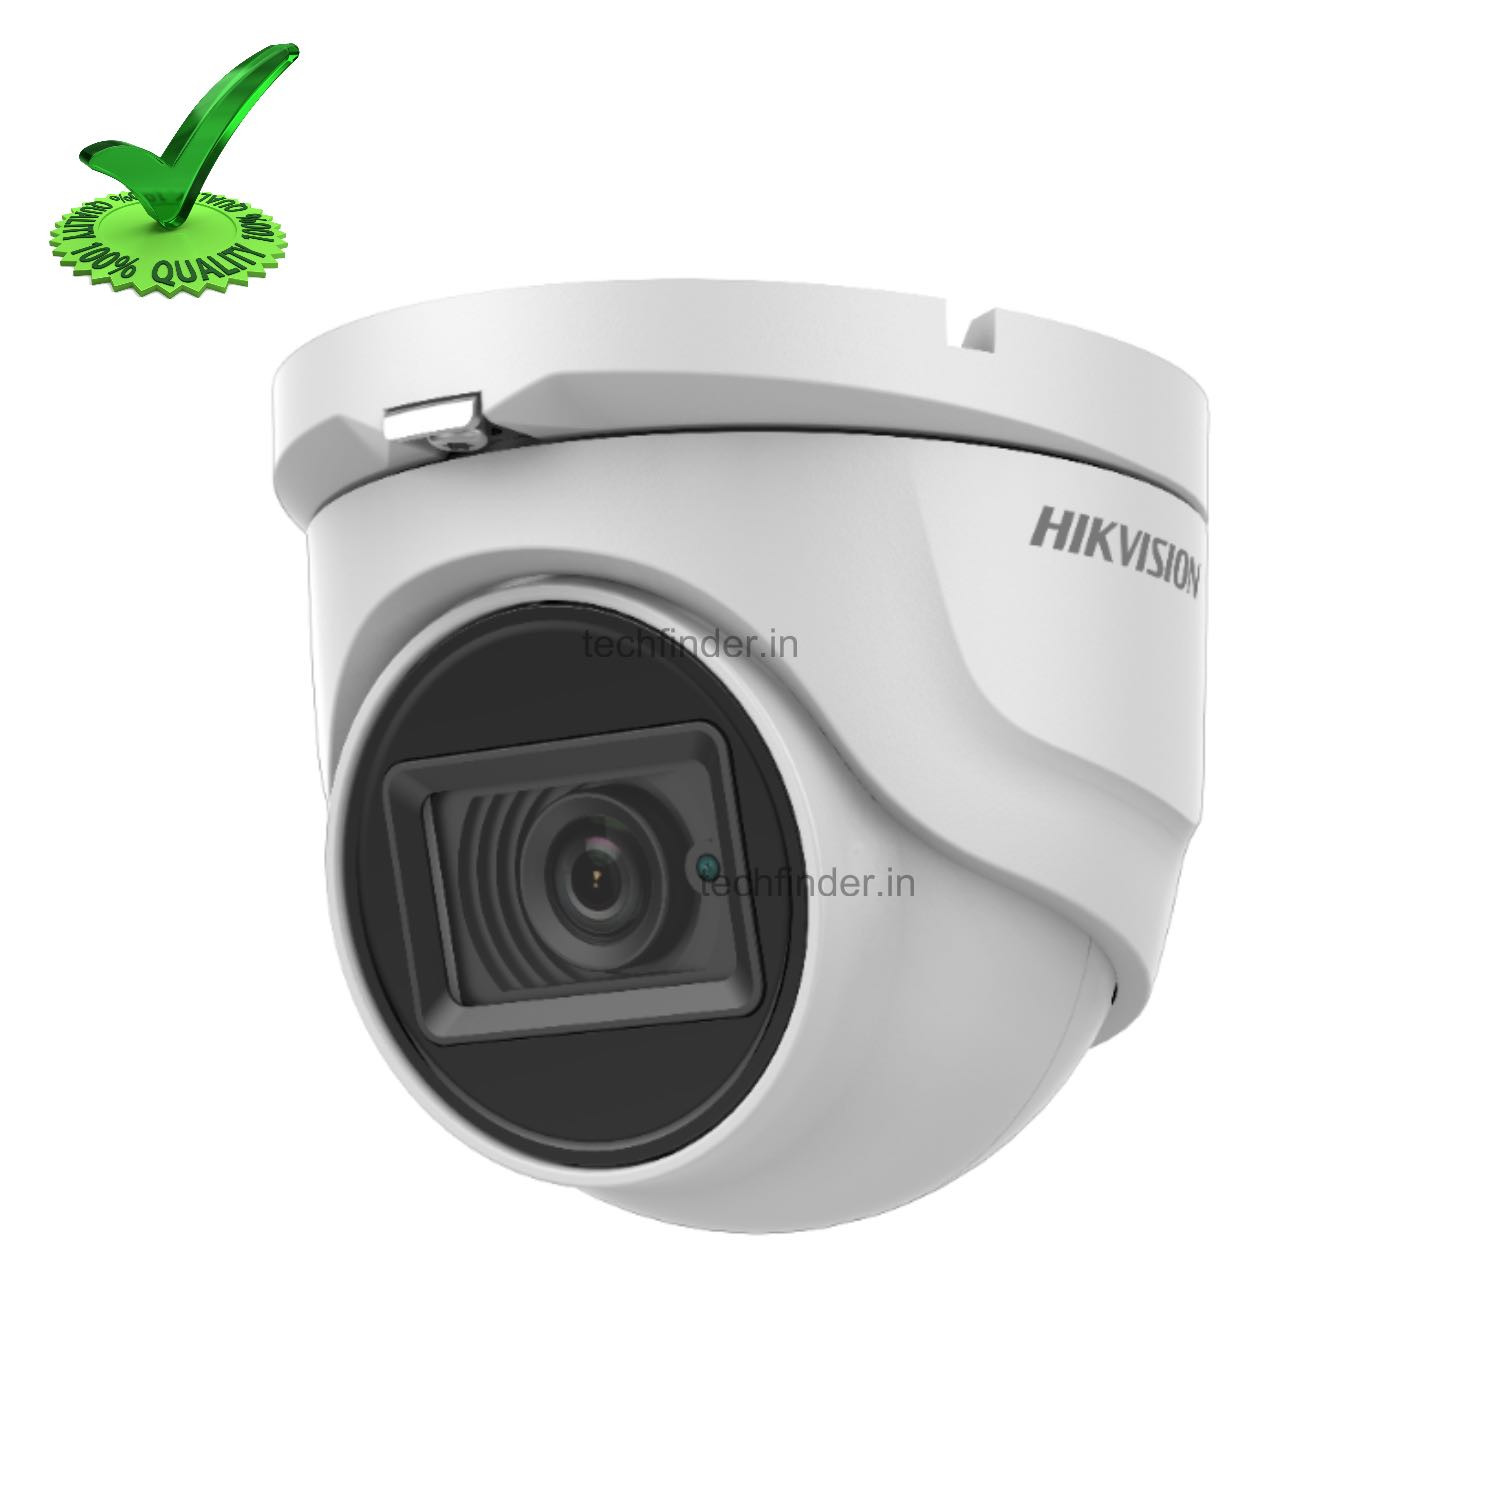 Hikvision DS-2CE76U1T-ITMF 8.29MP Fully Metal HD Dome Camera